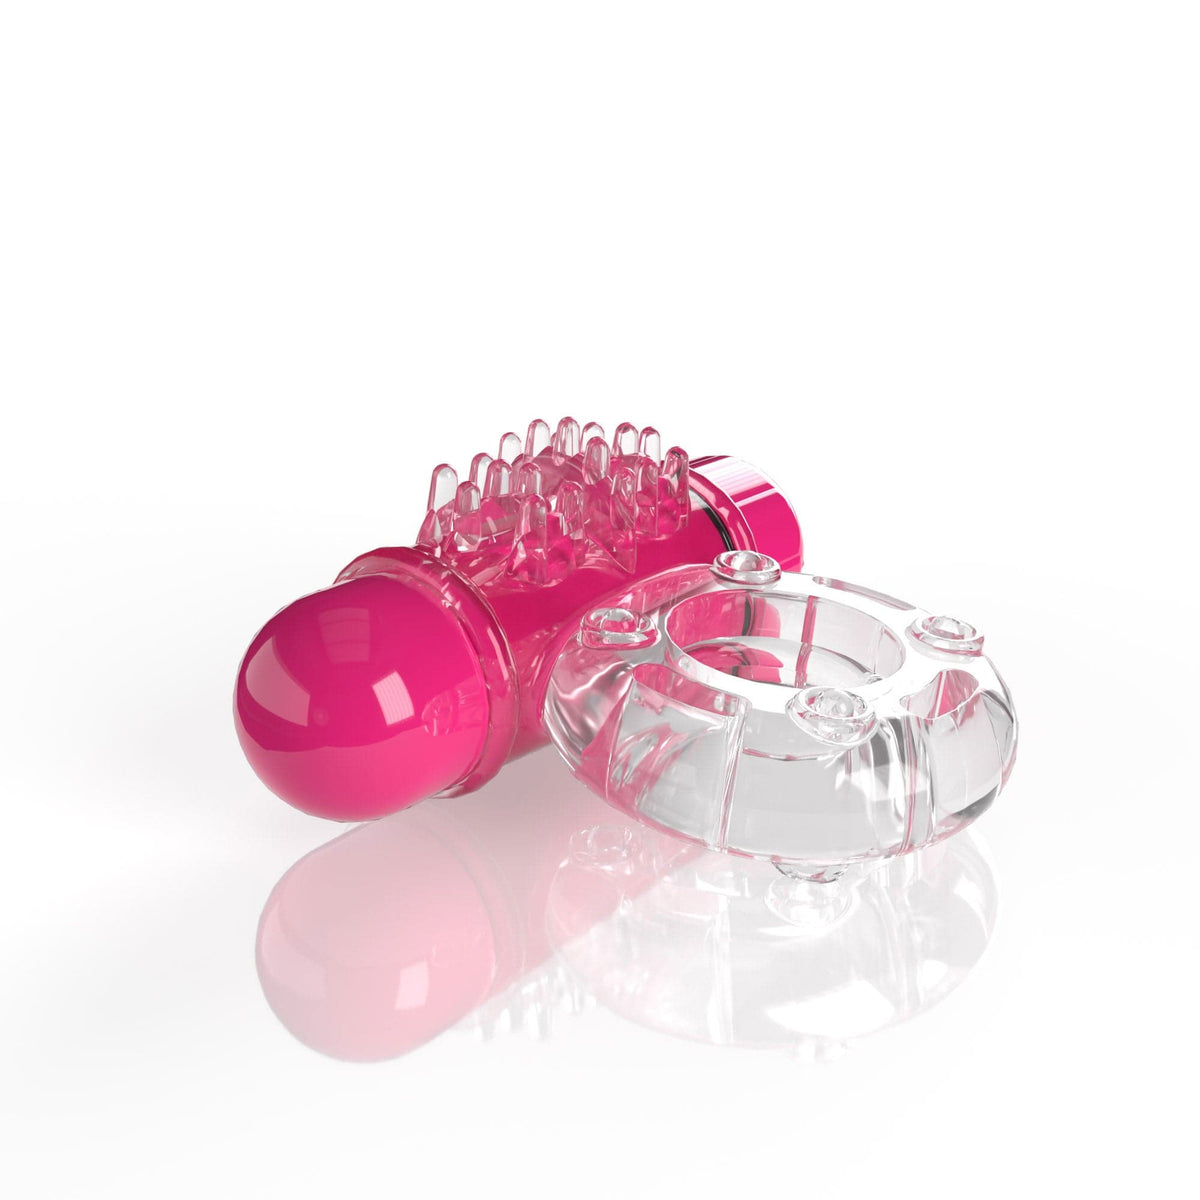 screaming o 4t owow super powered vibrating ring strawberry